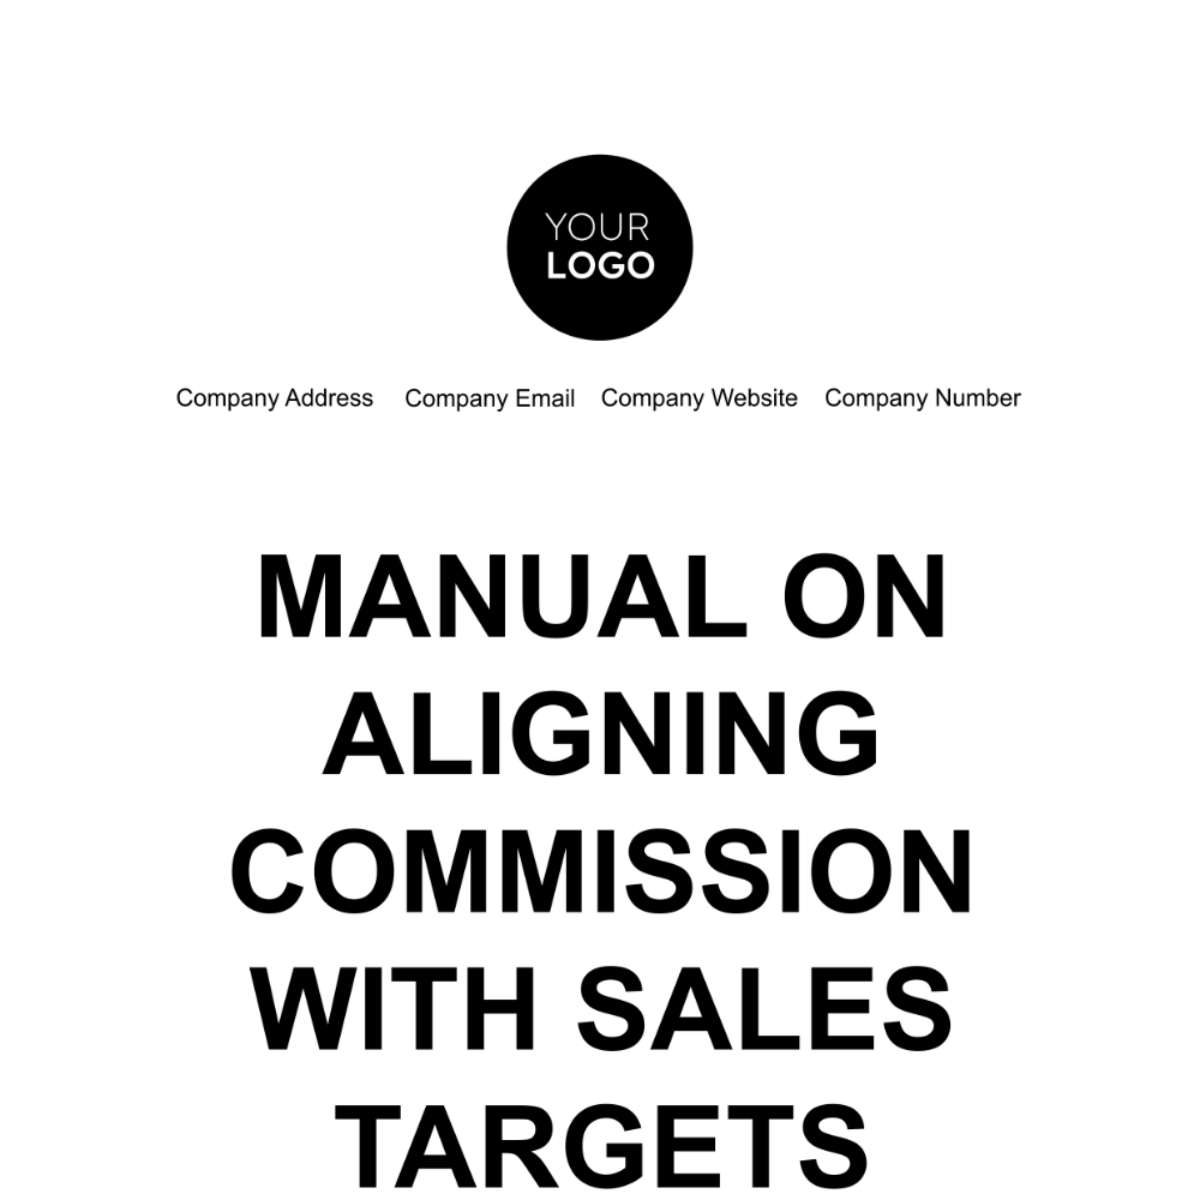 Manual on Aligning Commission with Sales Targets Template